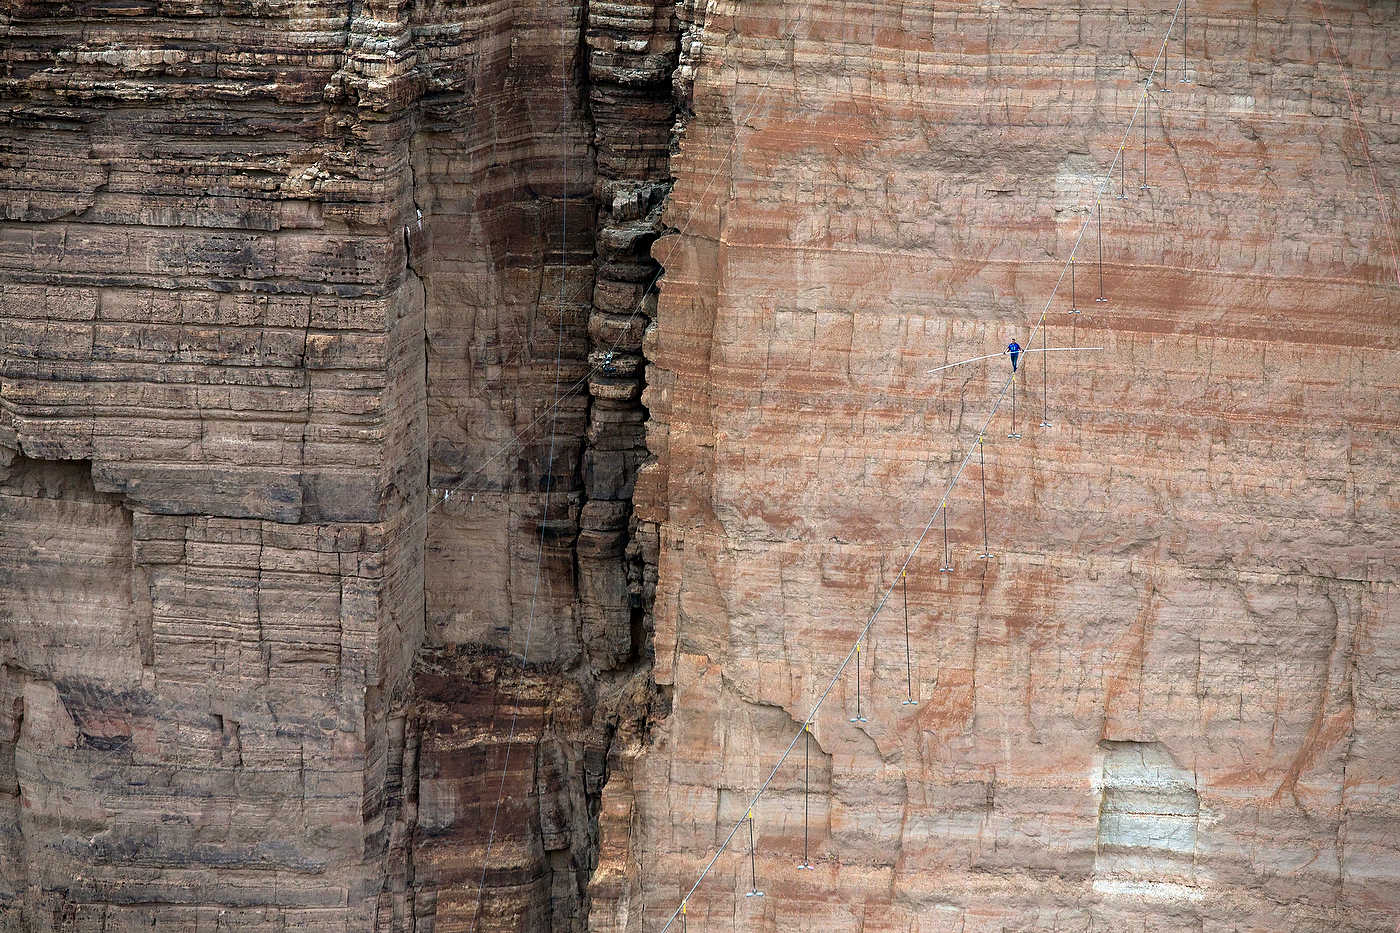 Nick Wallenda, Grand Canyon, for Discovery Channel.